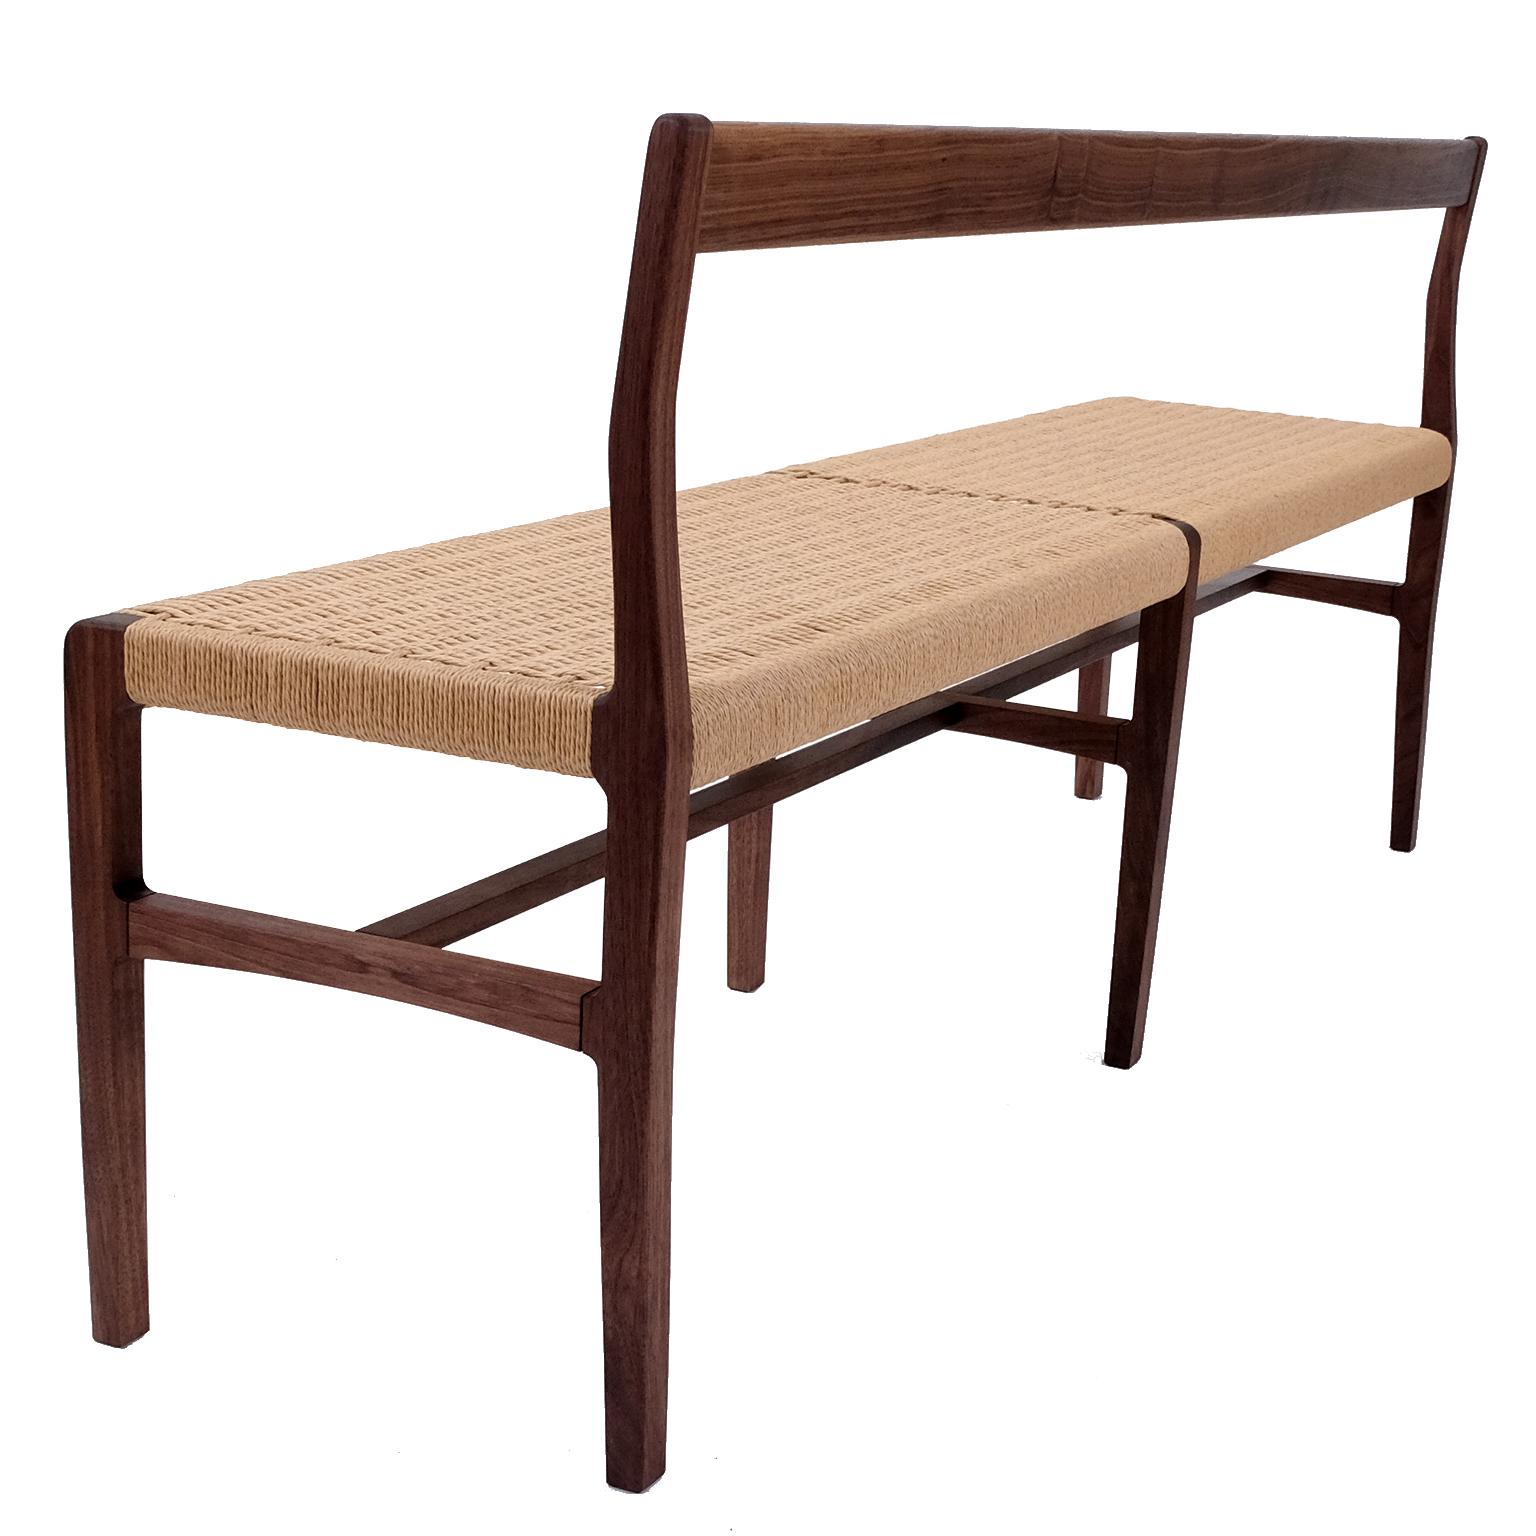 Giacomo Bench with Back, extra-long in Walnut with Danish Cord Seat (amerikanisch) im Angebot